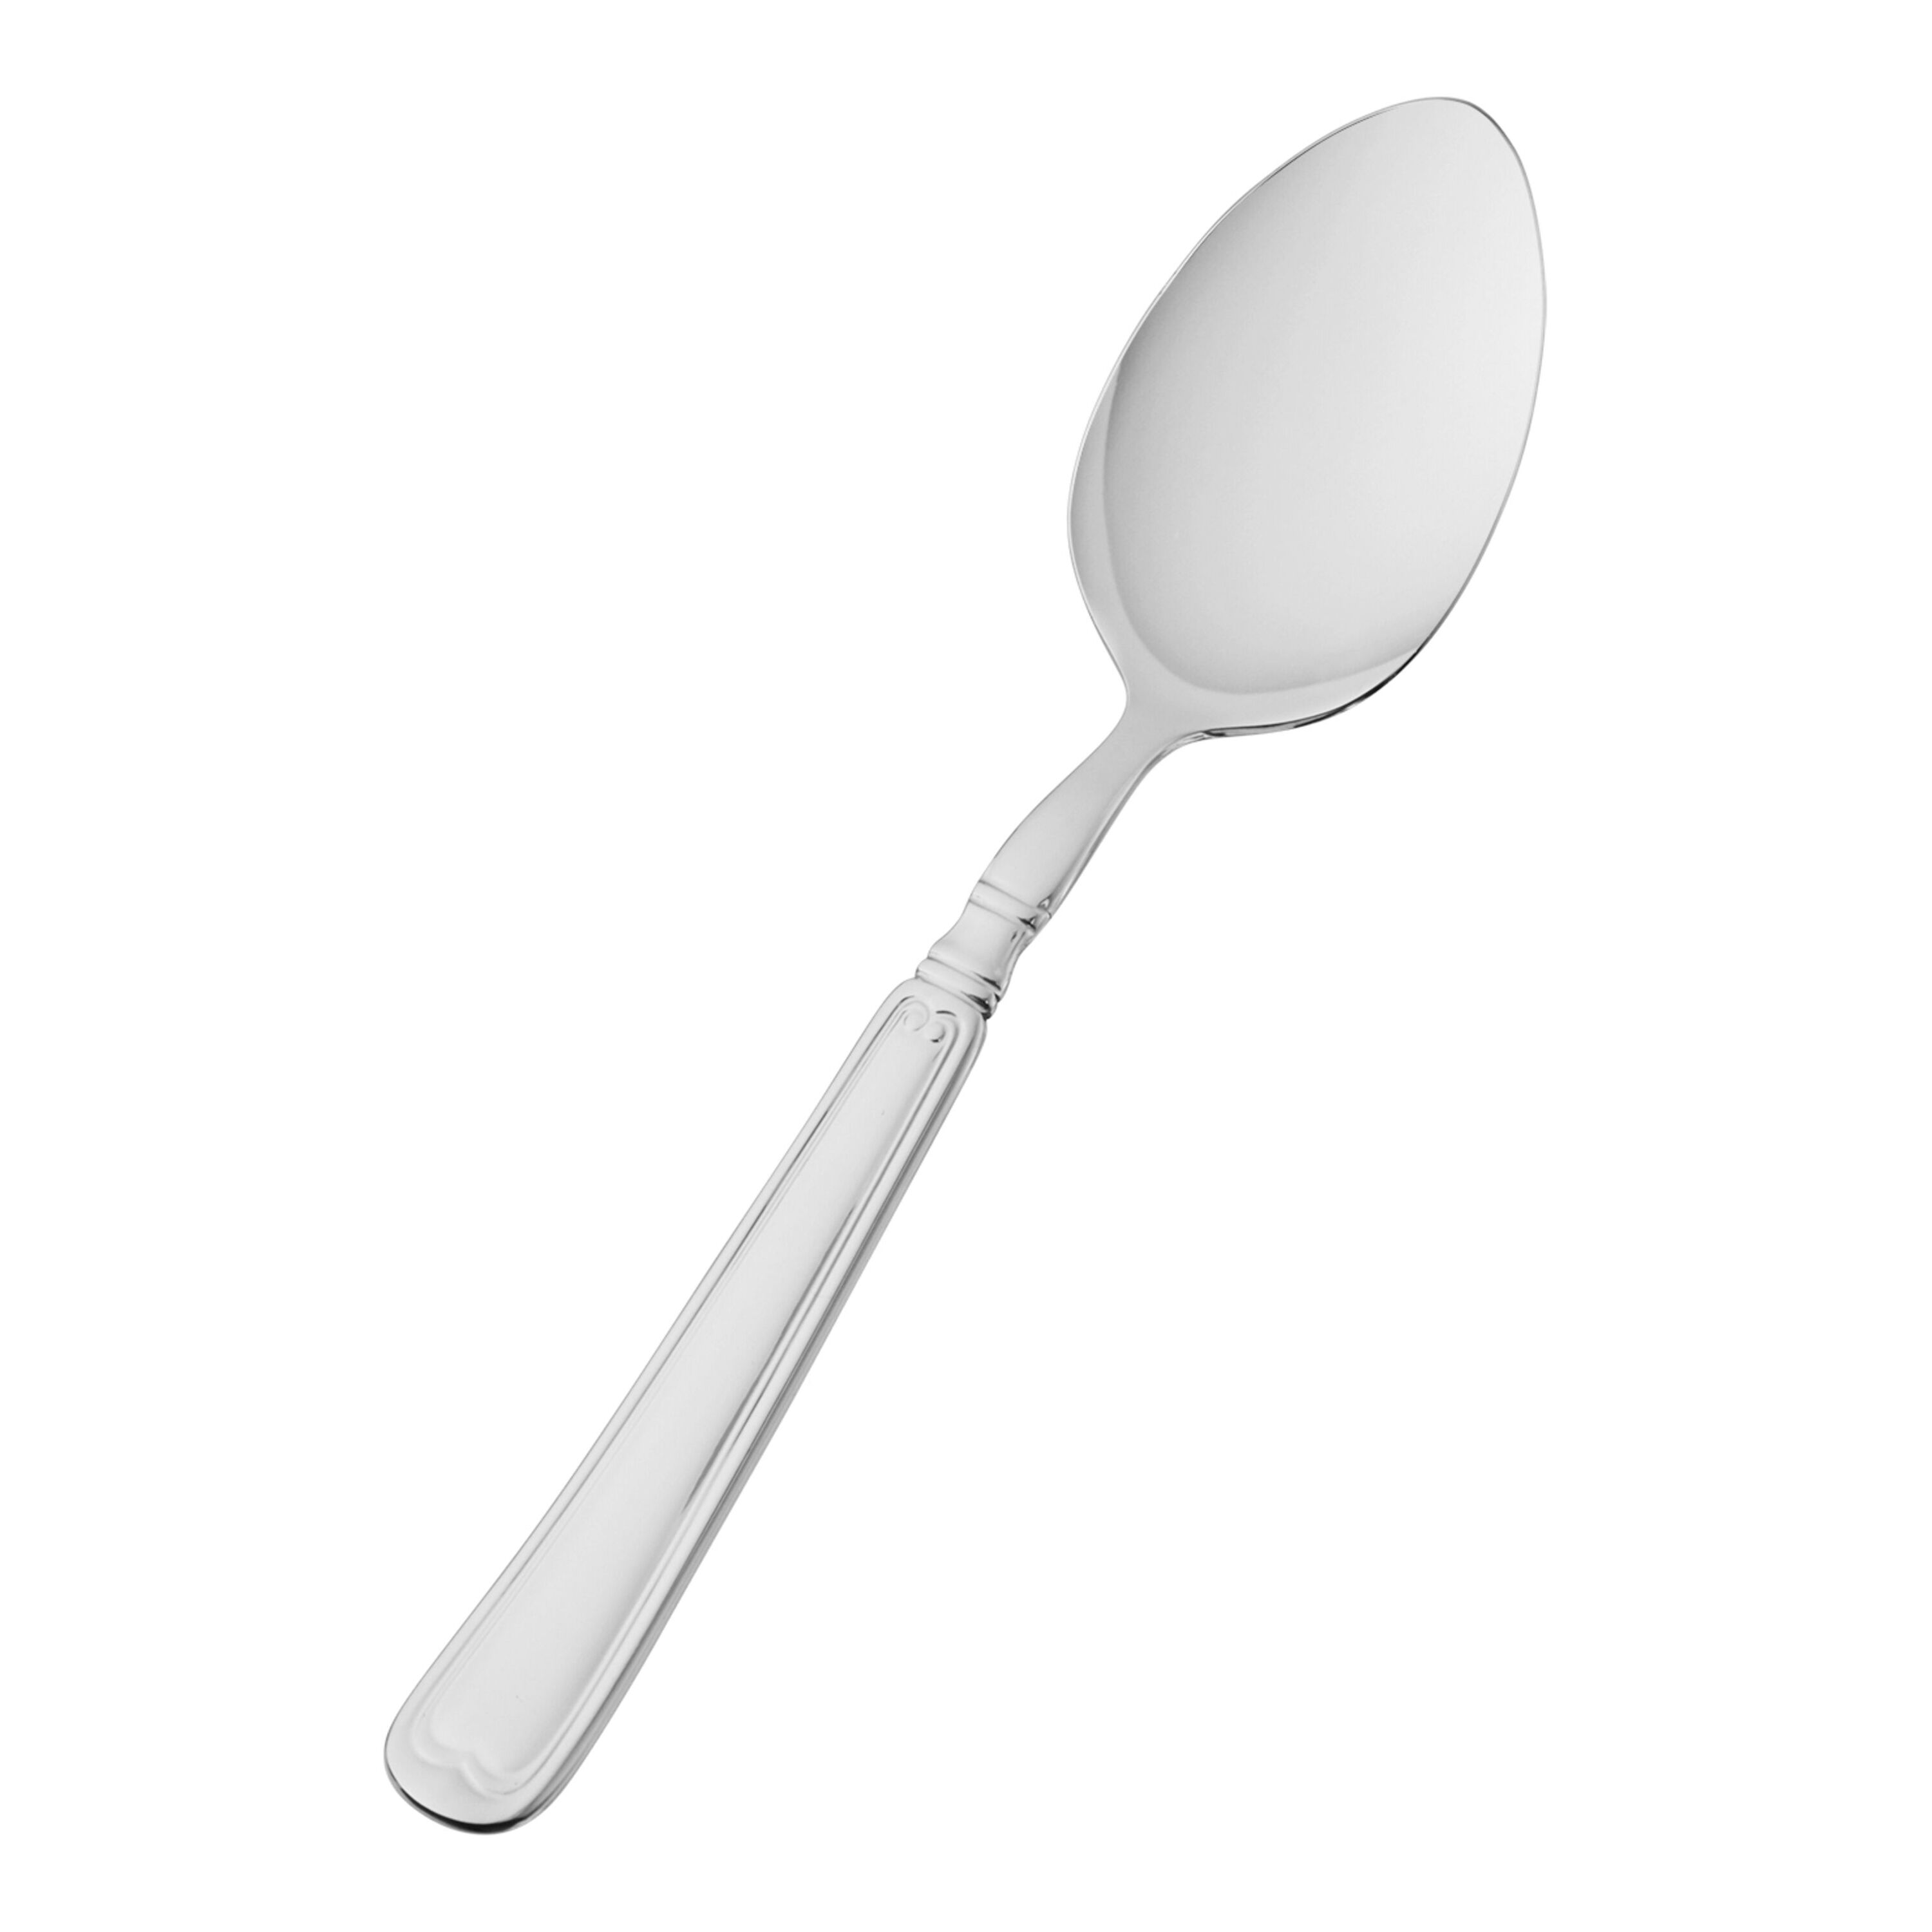  triangle Large Quenelle Spoon, Carded - Stainless Steel -  Creates Smooth, Rounded Scoops for Plating - Dishwasher Safe - Made in  Germany : Baby